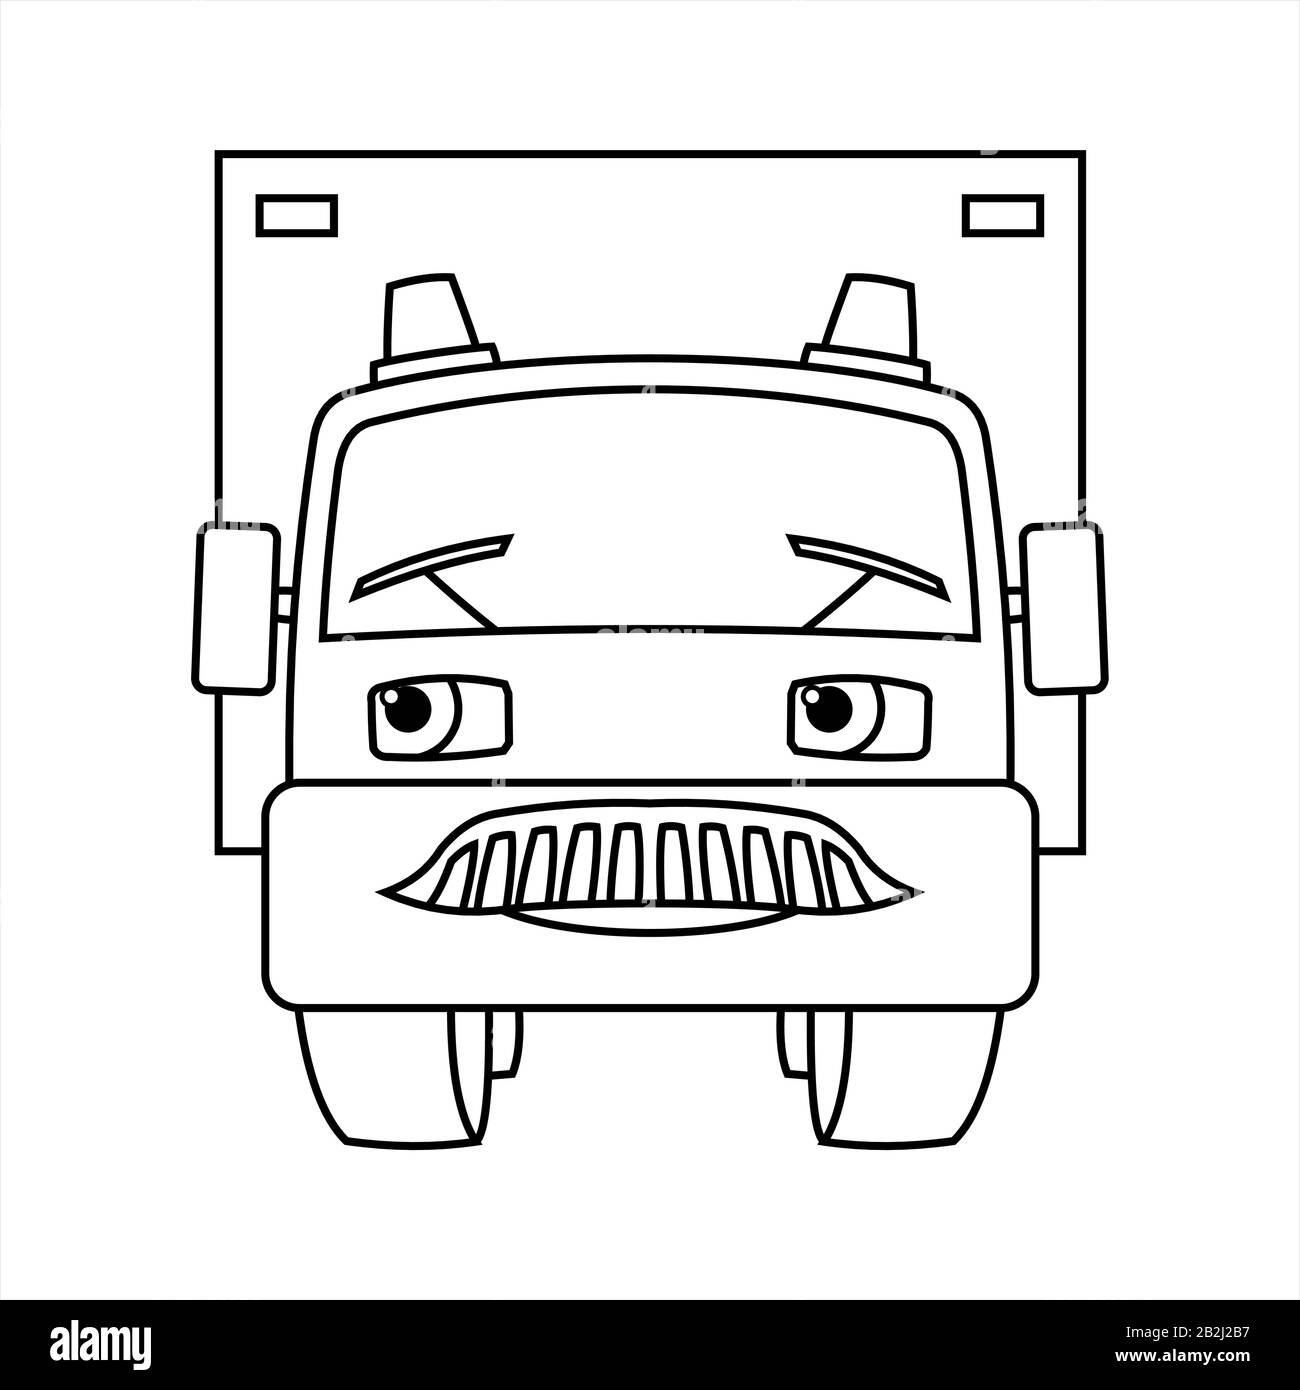 A Cartoon Smiling Car With Flashing Lights. Cartoon Truck. Contour Vector Illustration For Children's Coloring Book. Funny Character Truck For Childre Stock Vector